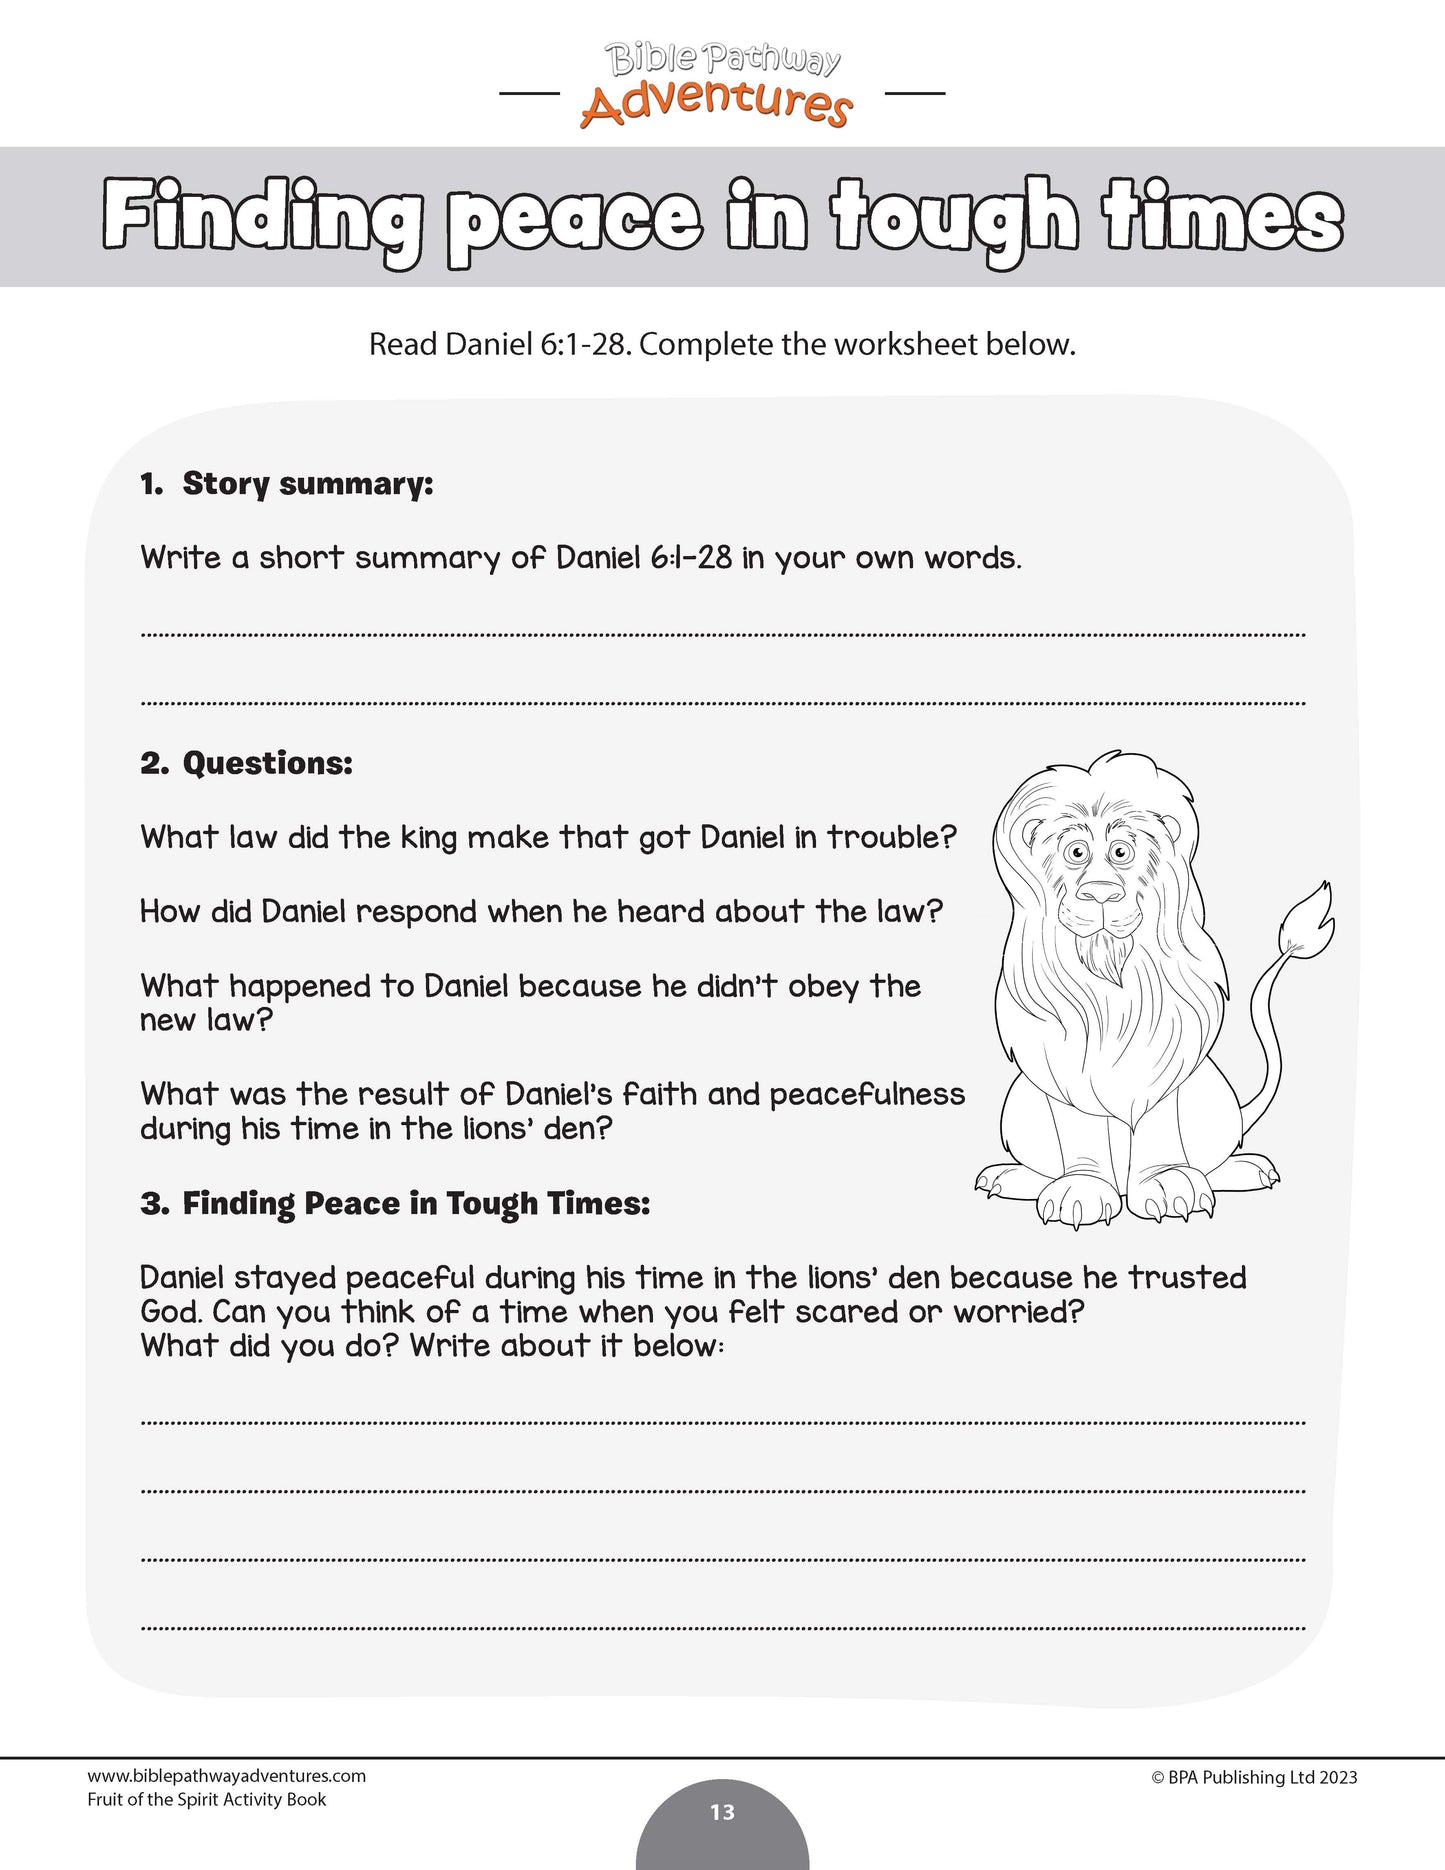 Peace: Fruit of the Spirit Activity Book